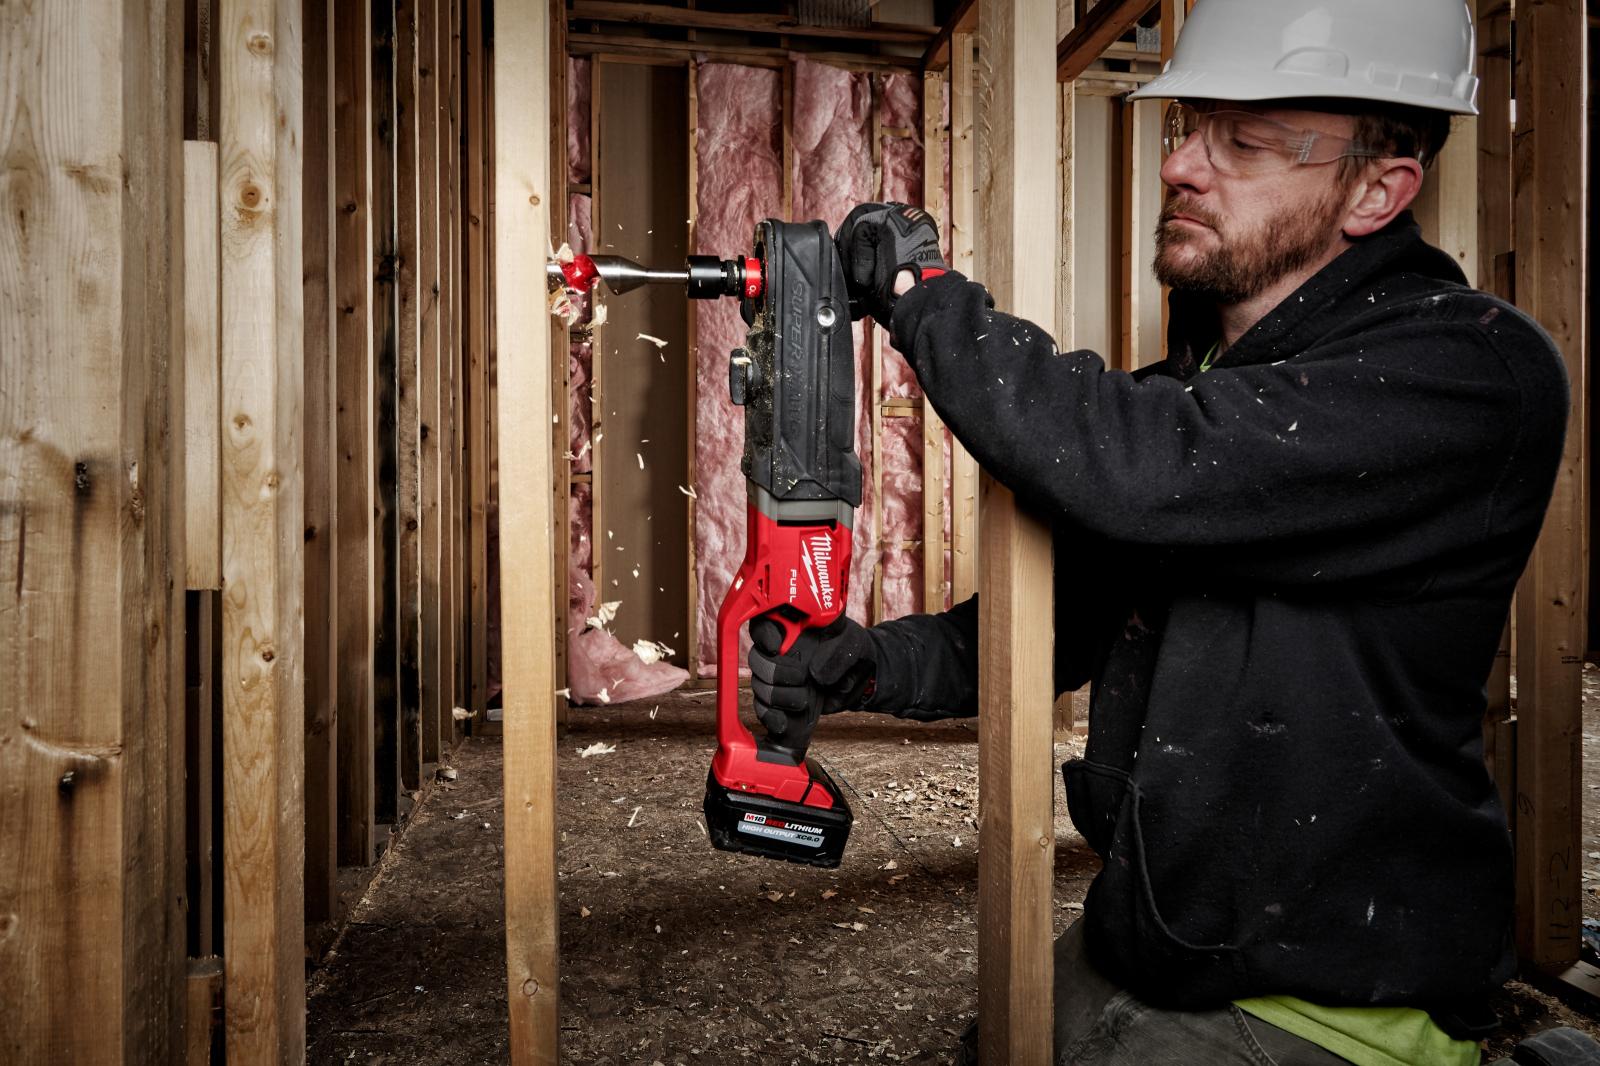 Milwaukee M18 Fuel 18-Volt Lithium-Ion Brushless Cordless GEN 2 SUPER HAWG 7/16 in. Right Angle Drill